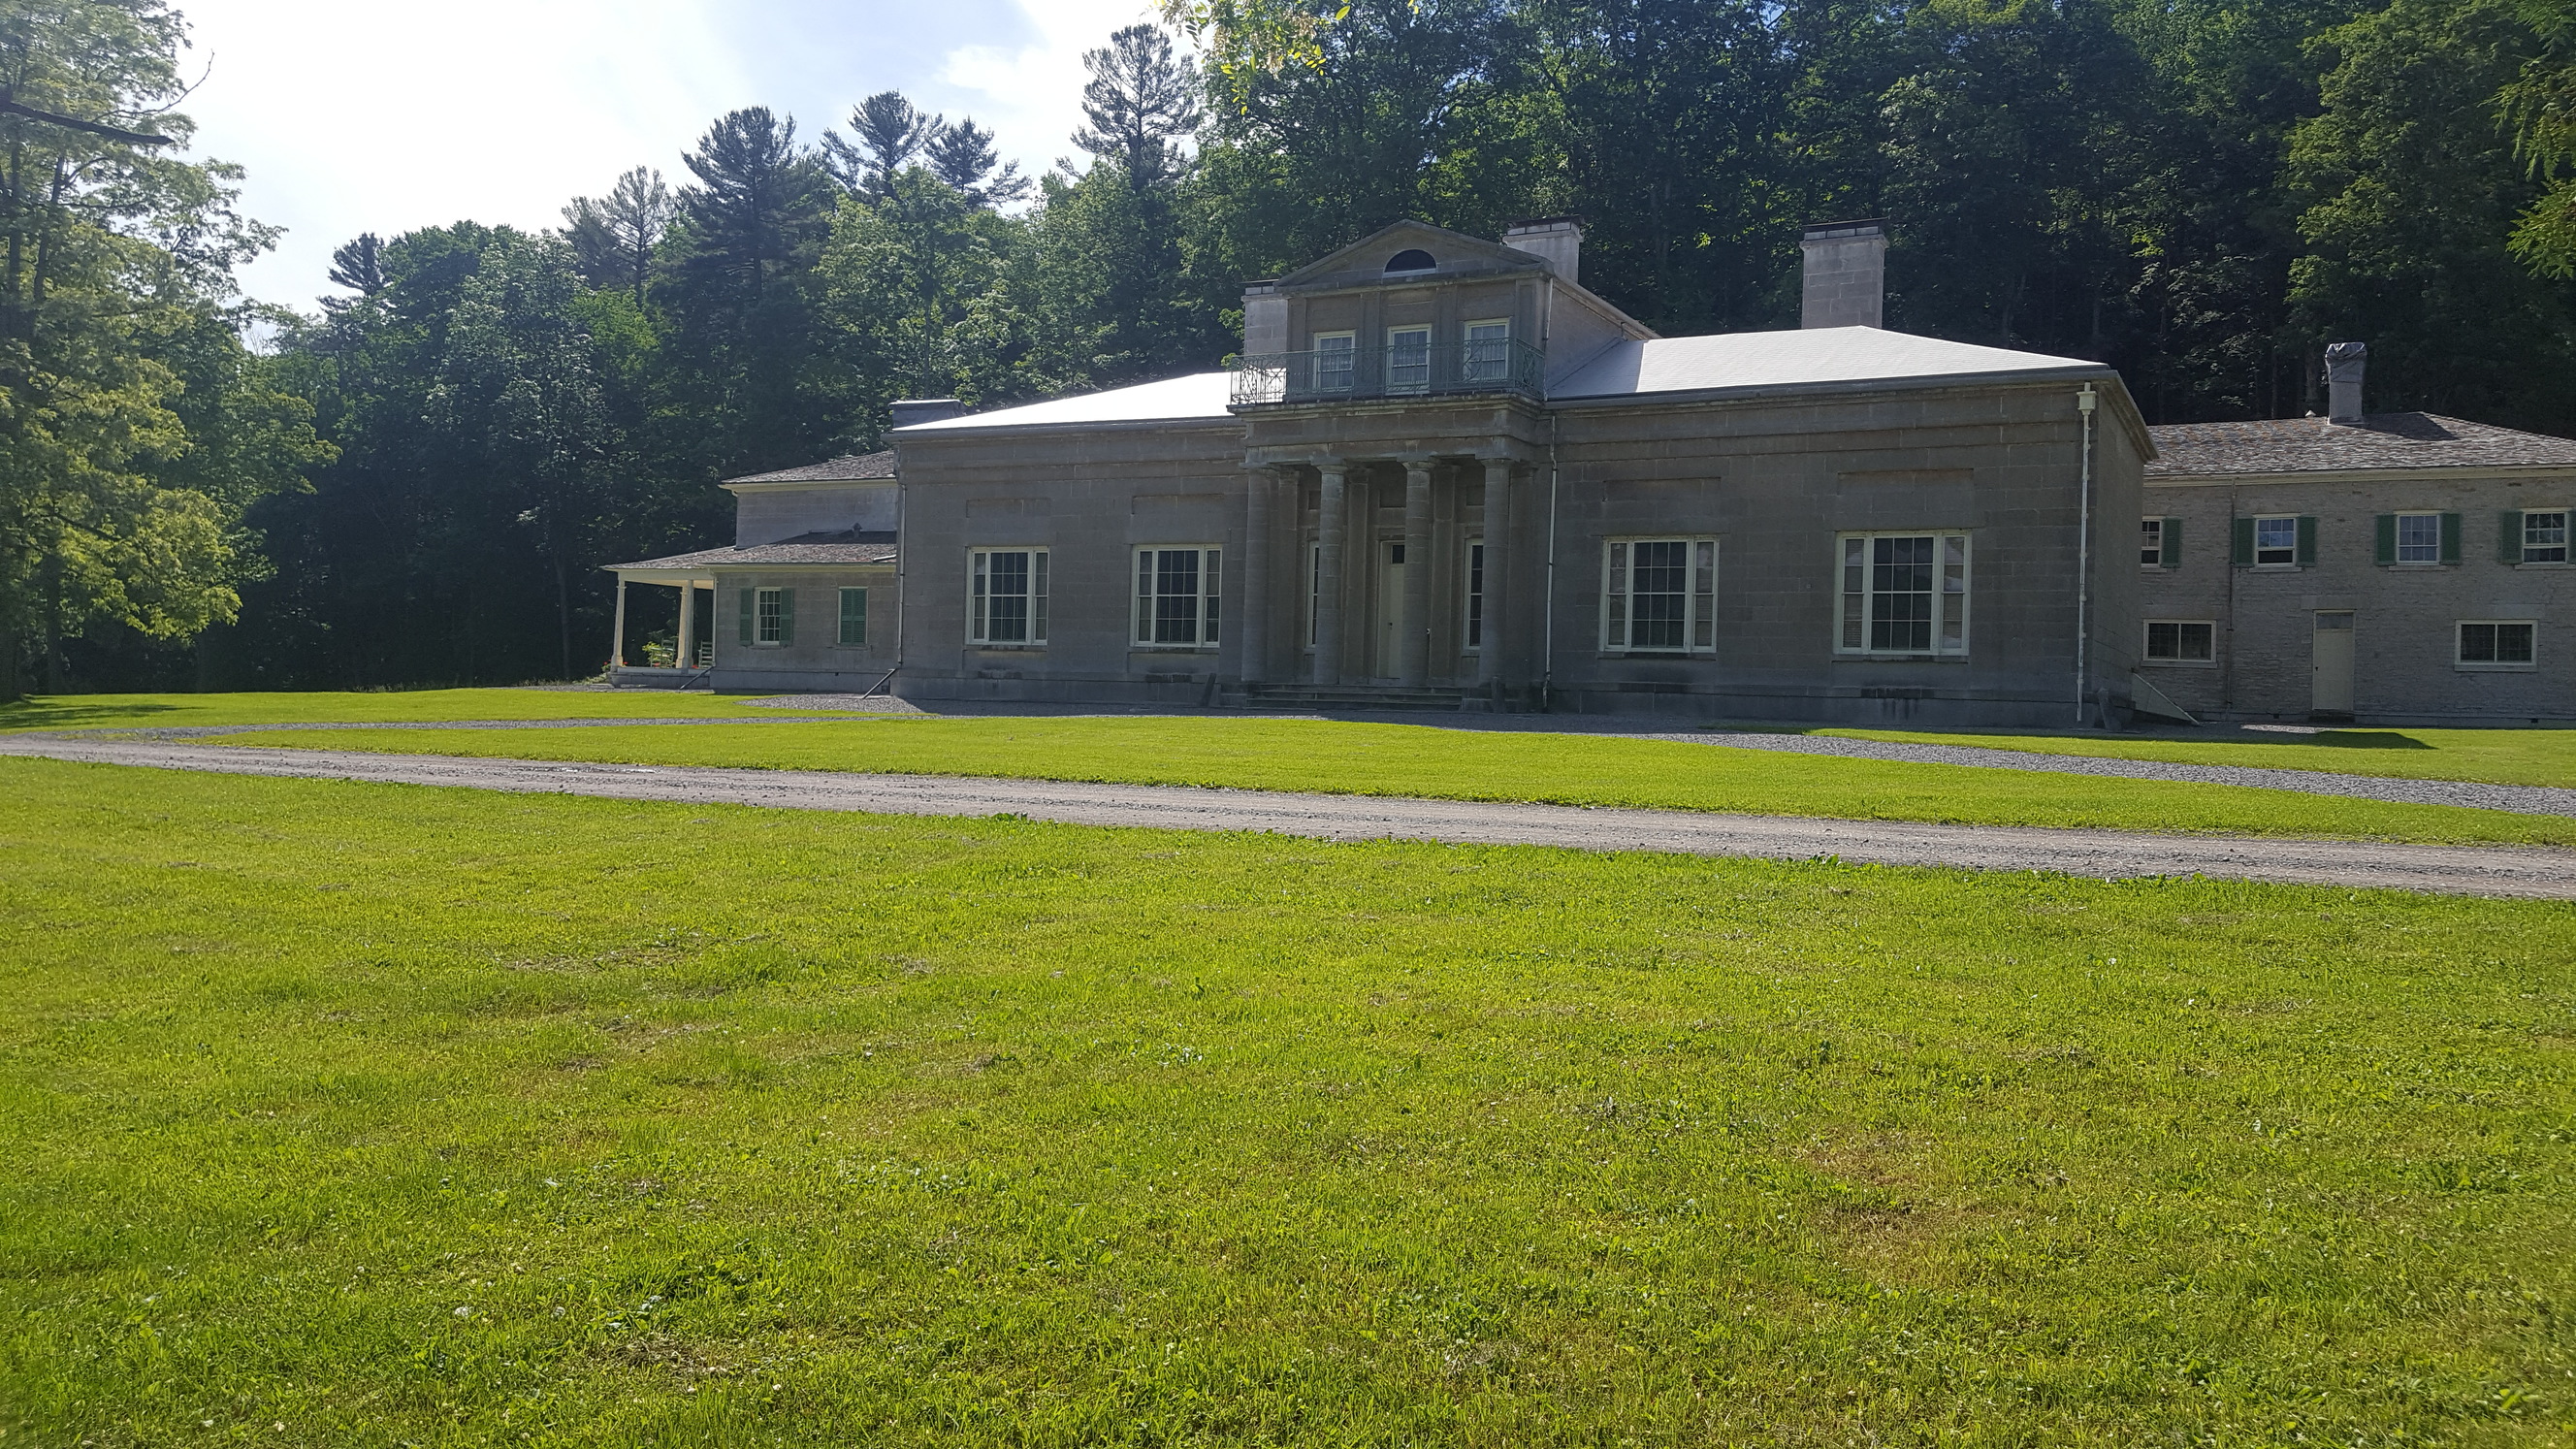 The Hyde Mansion at Glimmerglass State Park